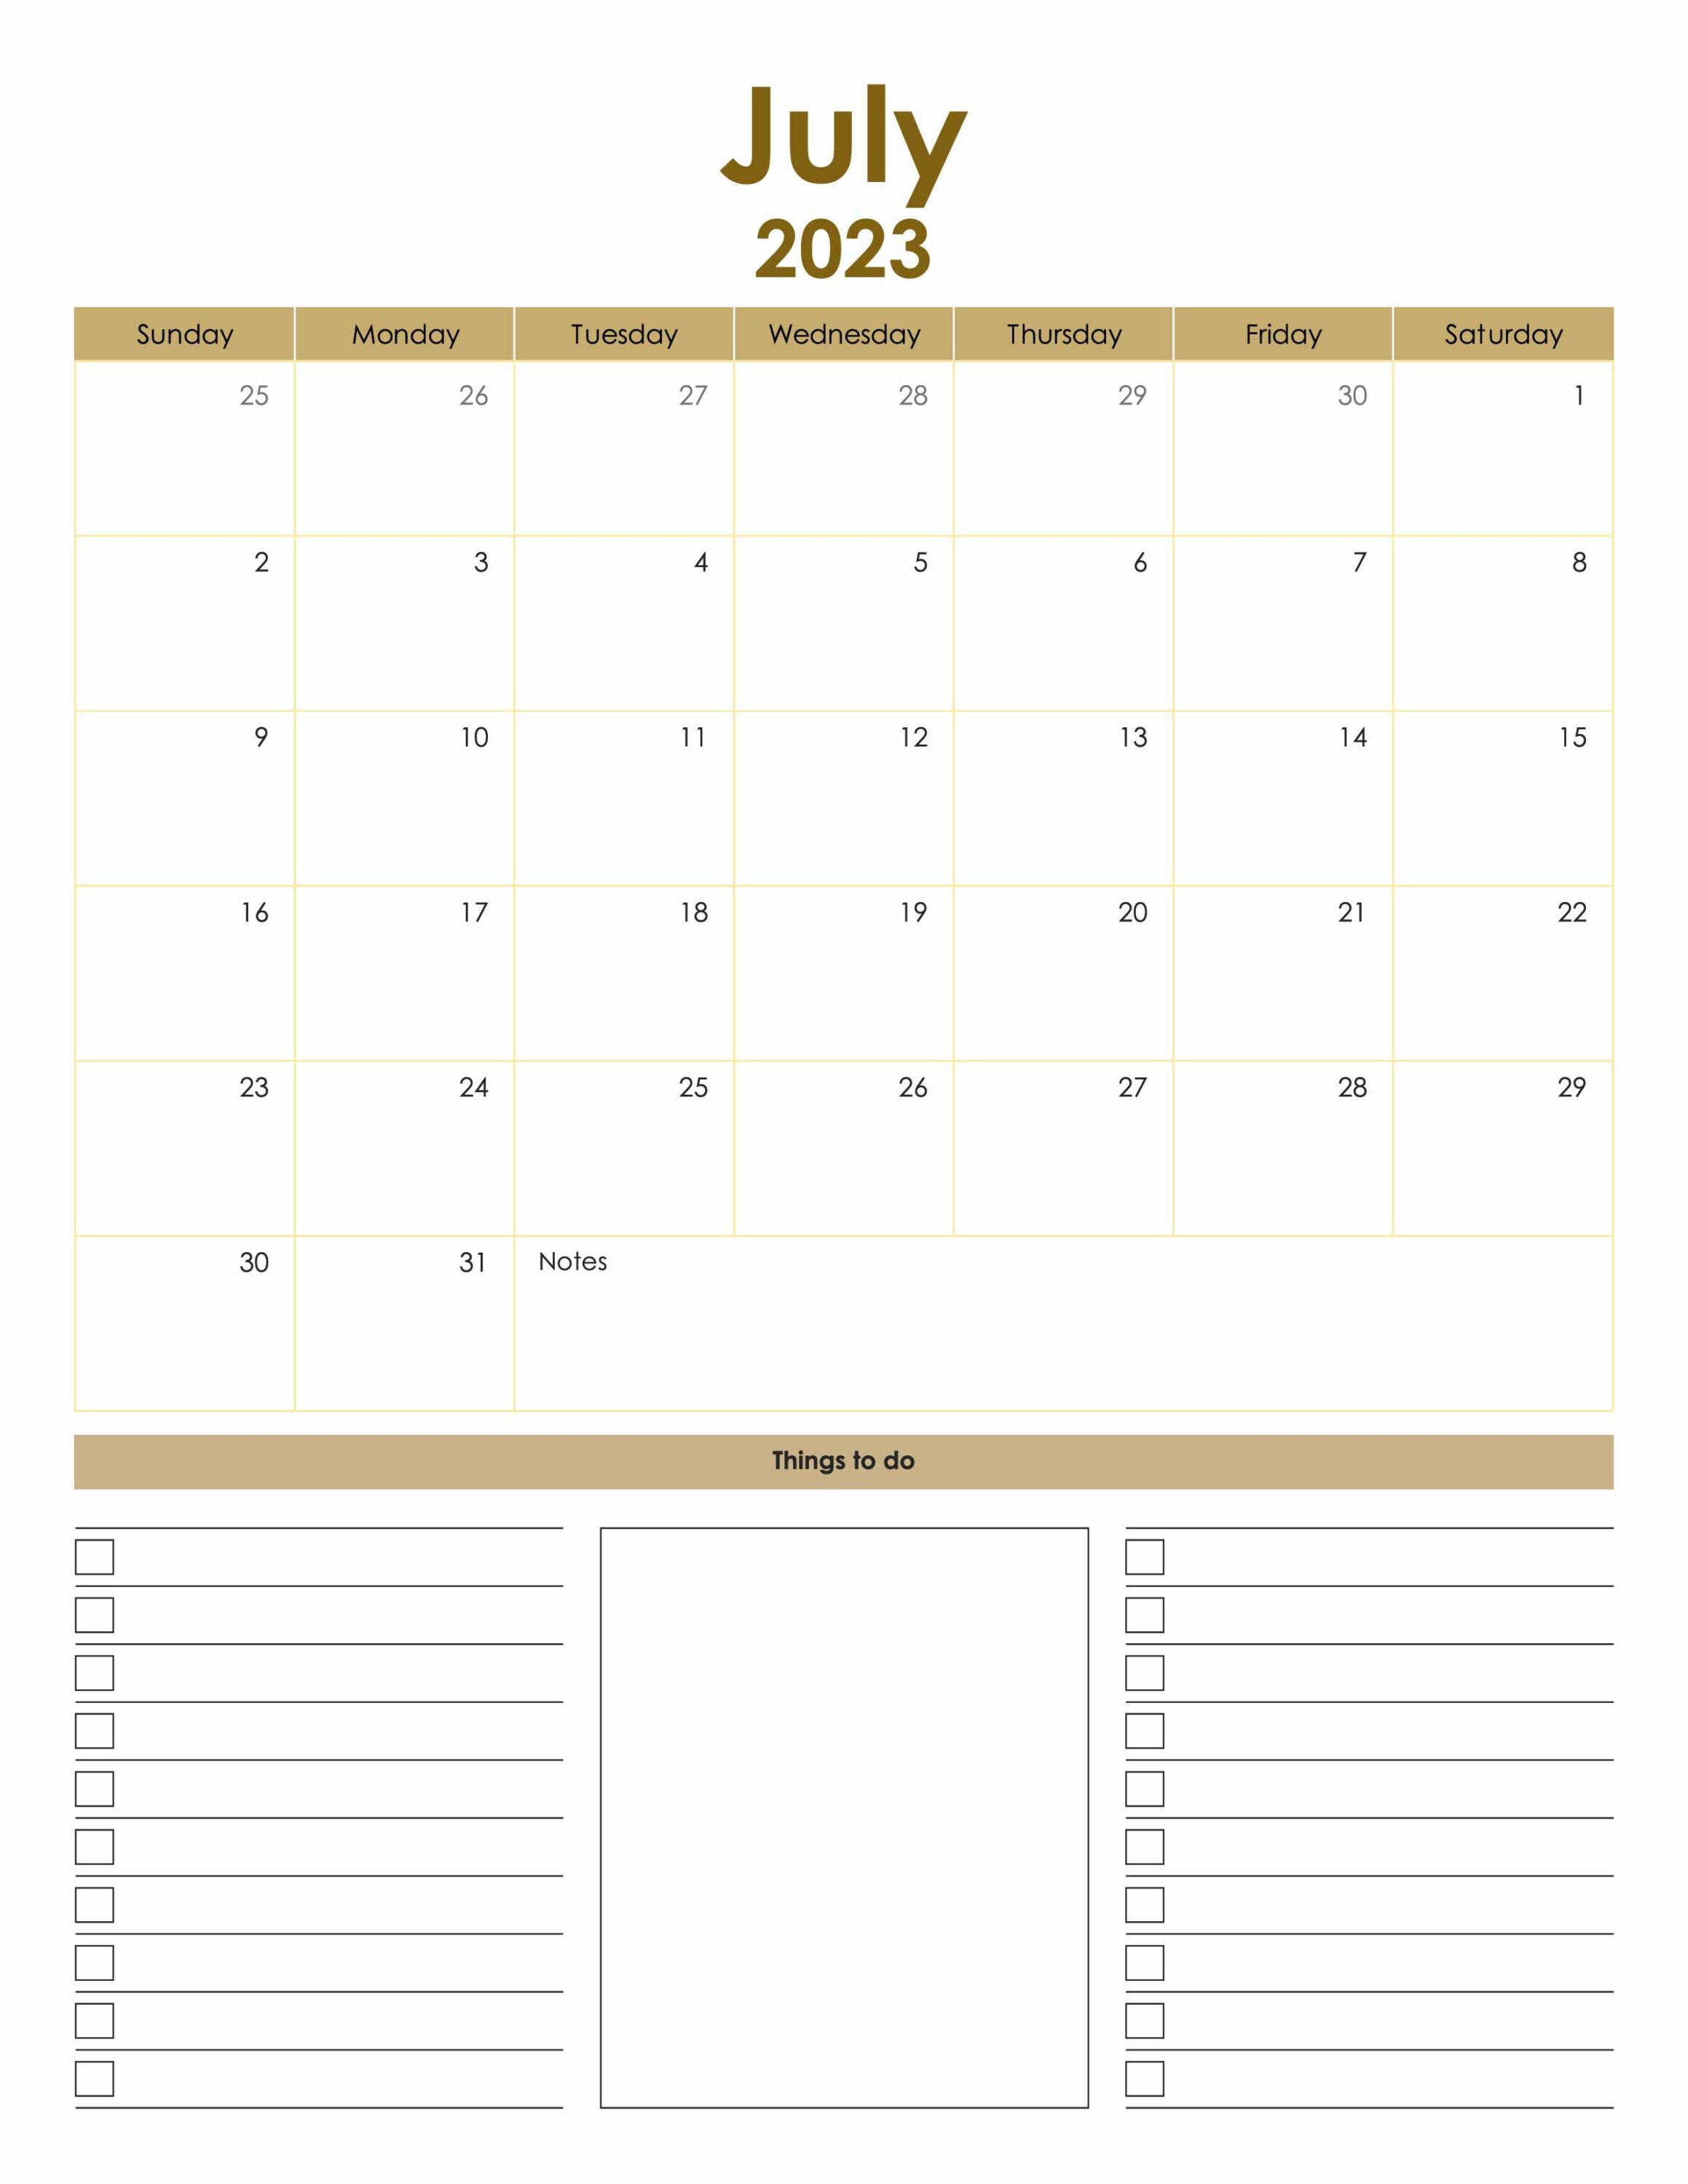 2023 Dated Planner Bundle, July page.